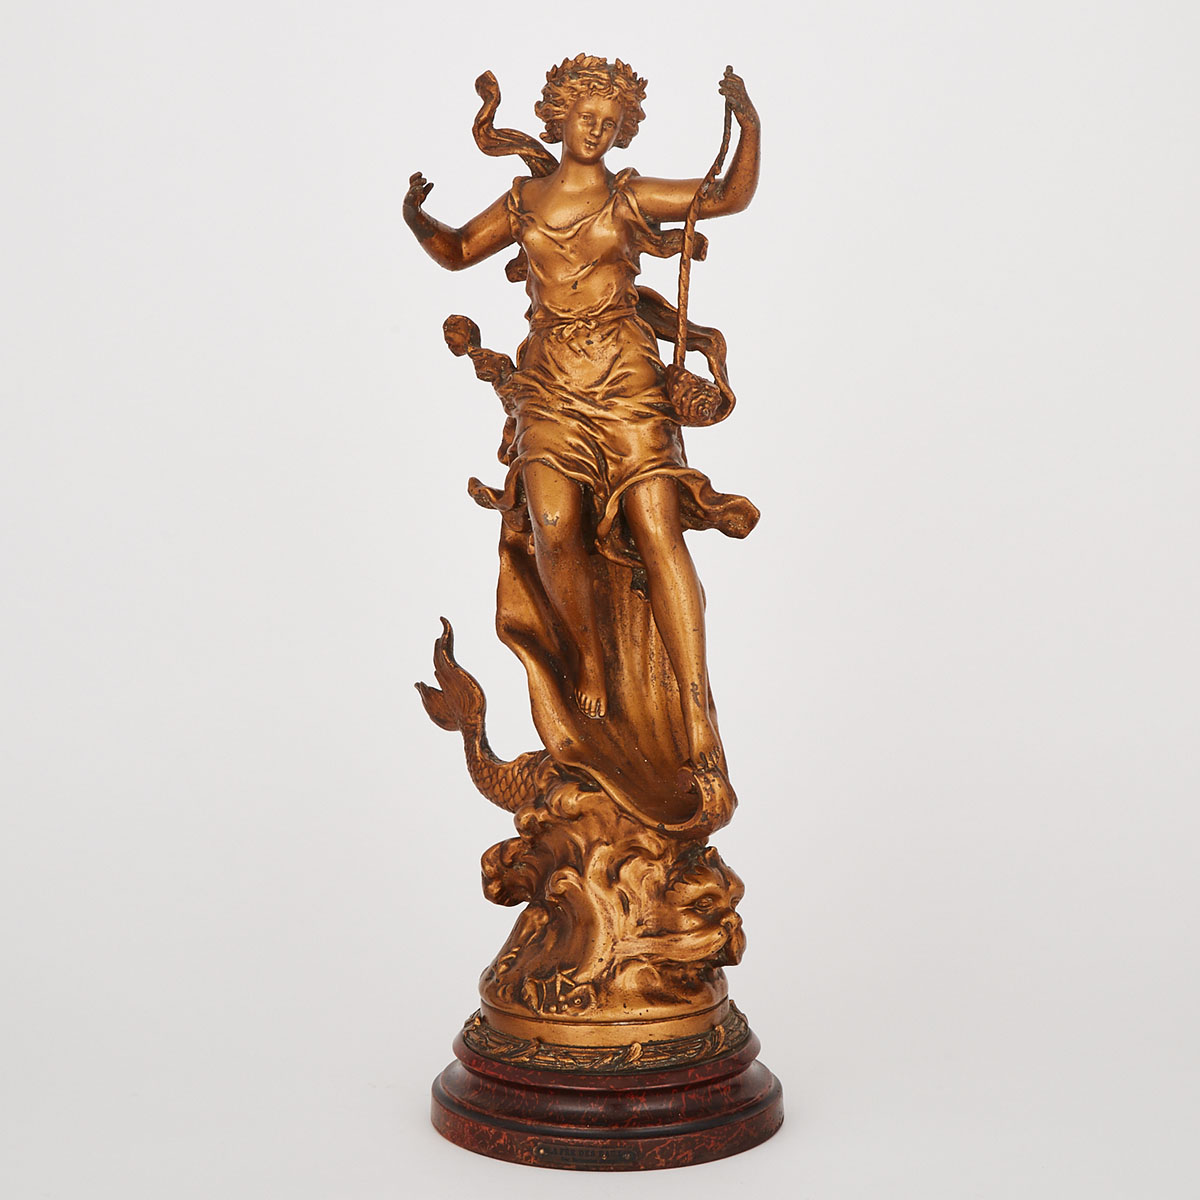 French GiIt Metal Figure ‘La Fée des eaux’, after the work by Rancoulet, 19th century